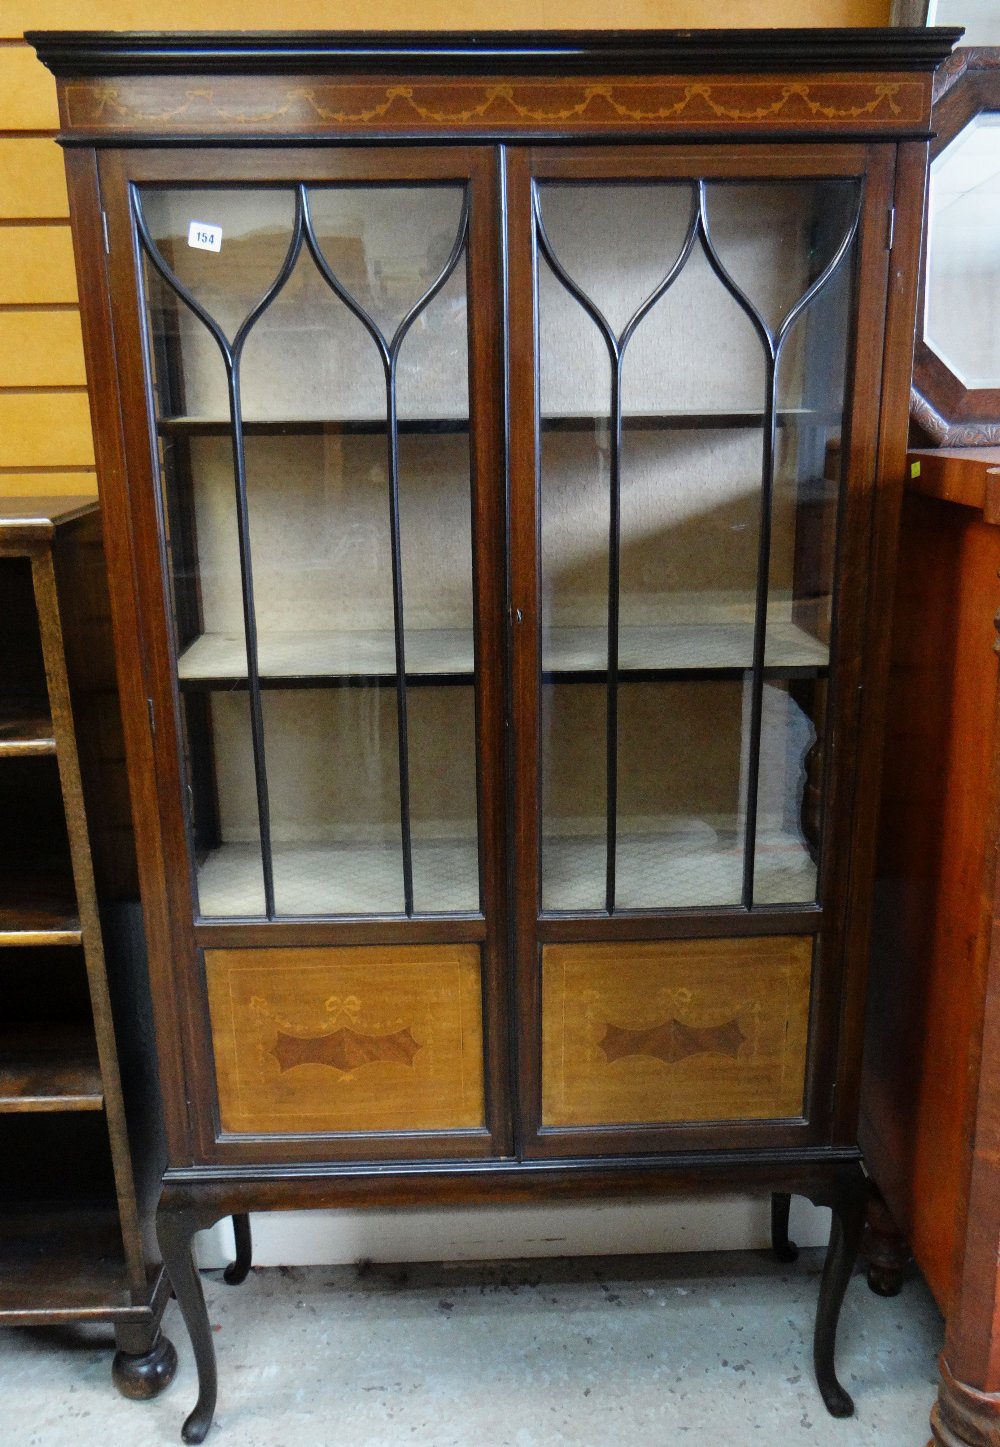 EDWARDIAN MAHOGANY & MARQUETRY DISPLAY CABINET with inlaid frieze, astragal glazed and marquetry